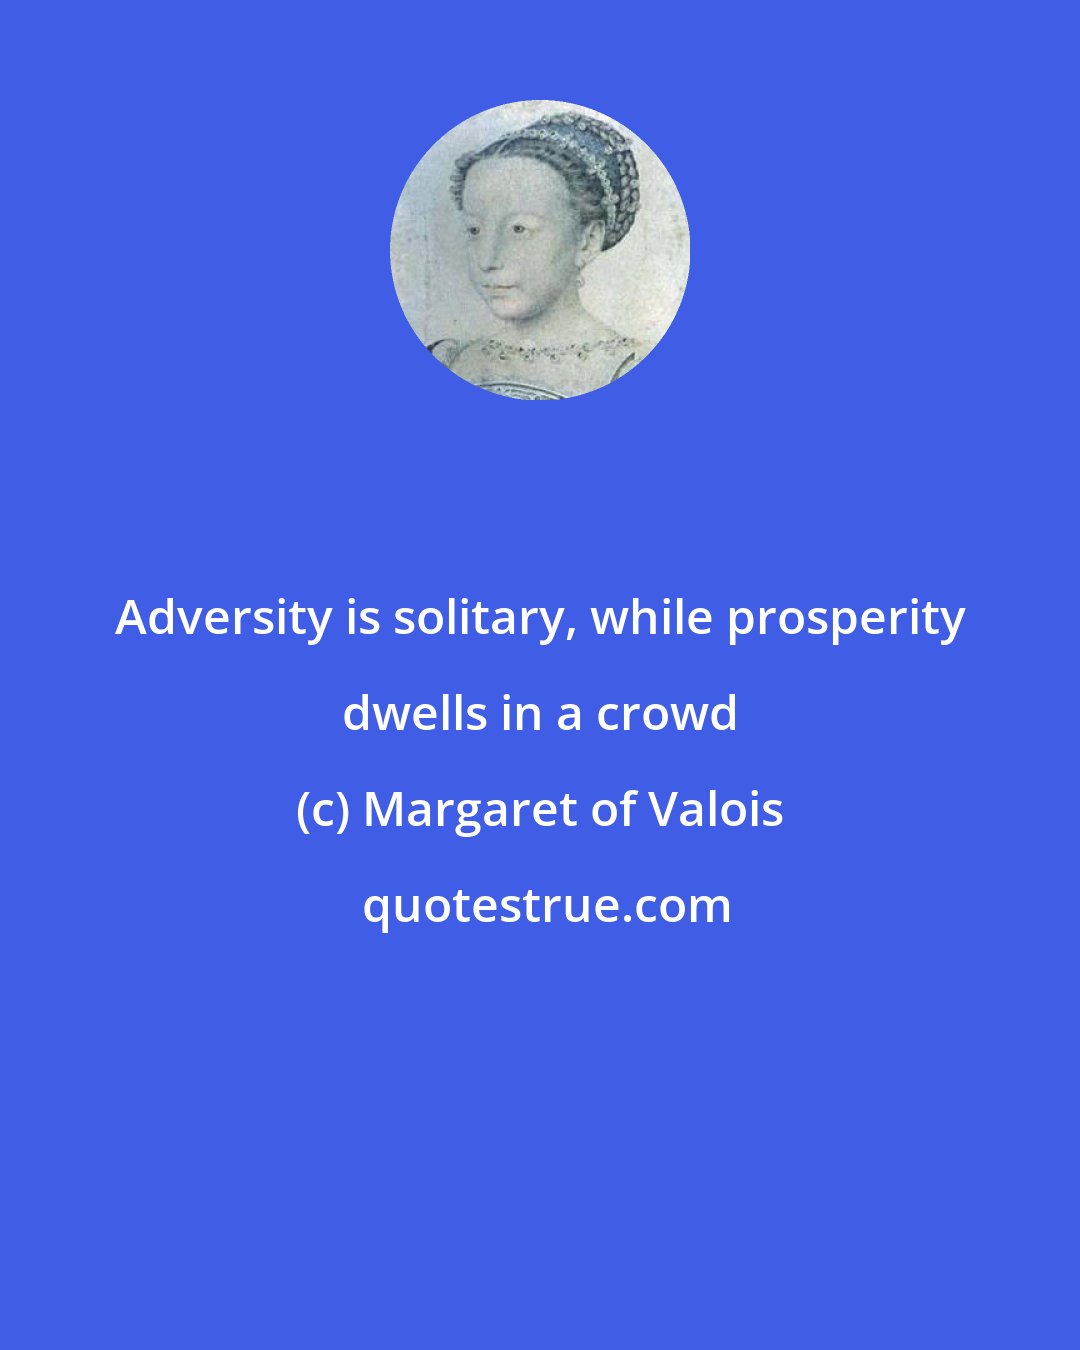 Margaret of Valois: Adversity is solitary, while prosperity dwells in a crowd